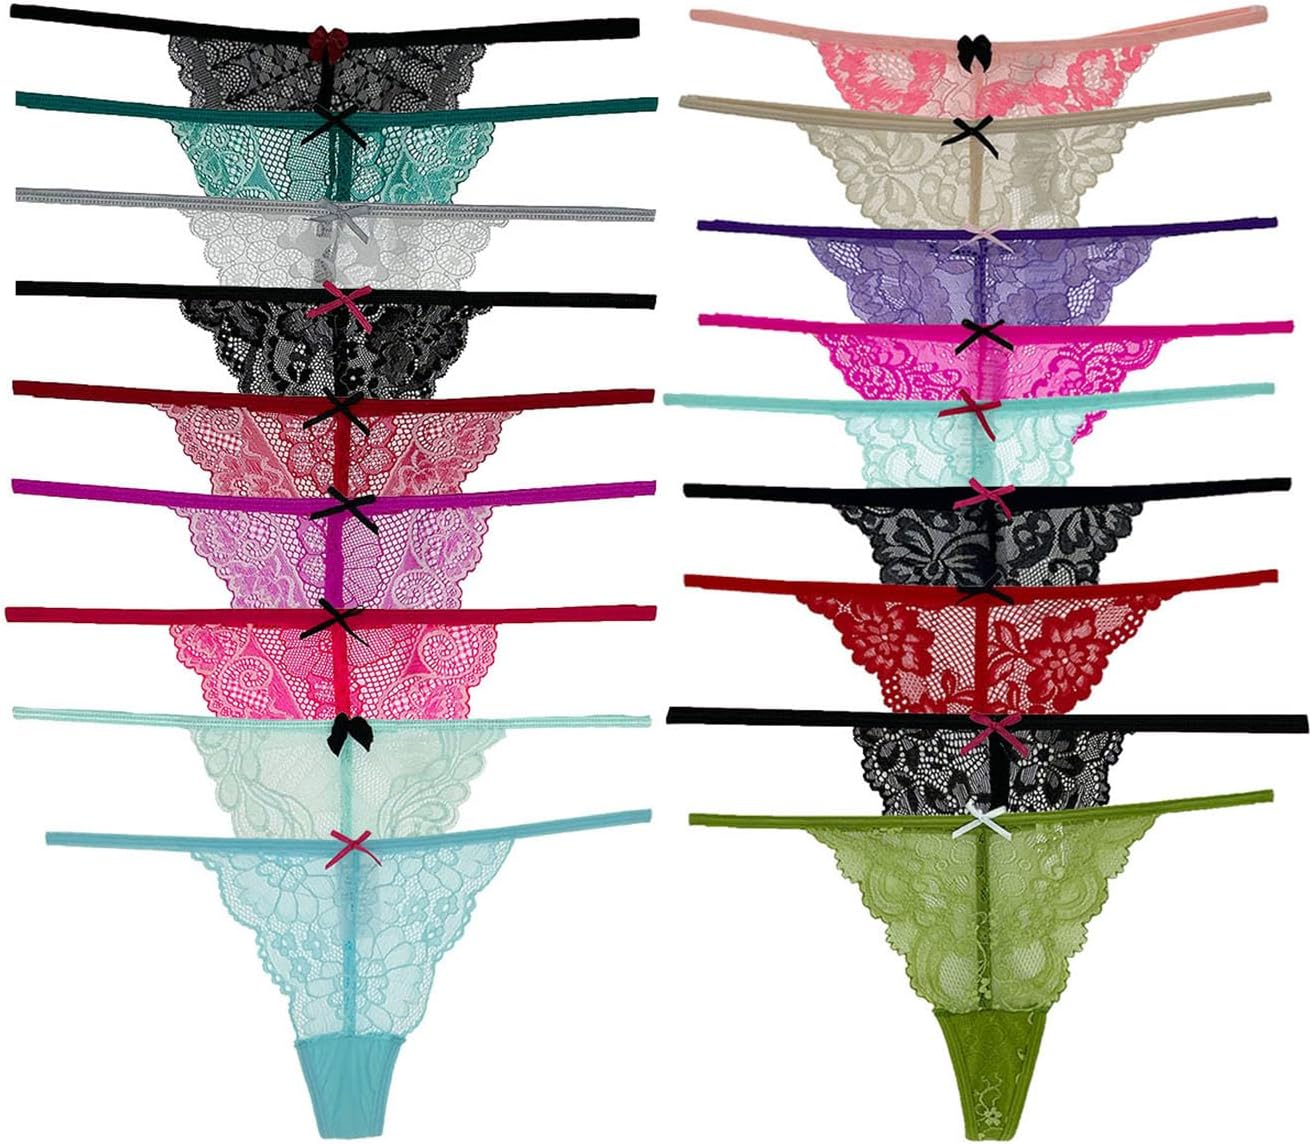  Closecret Lingerie Women Low Rise T-string Multi Pack Vary  Color T-back Thong Panties(XX-Small-X-Small, cotton style): Clothing, Shoes  & Jewelry